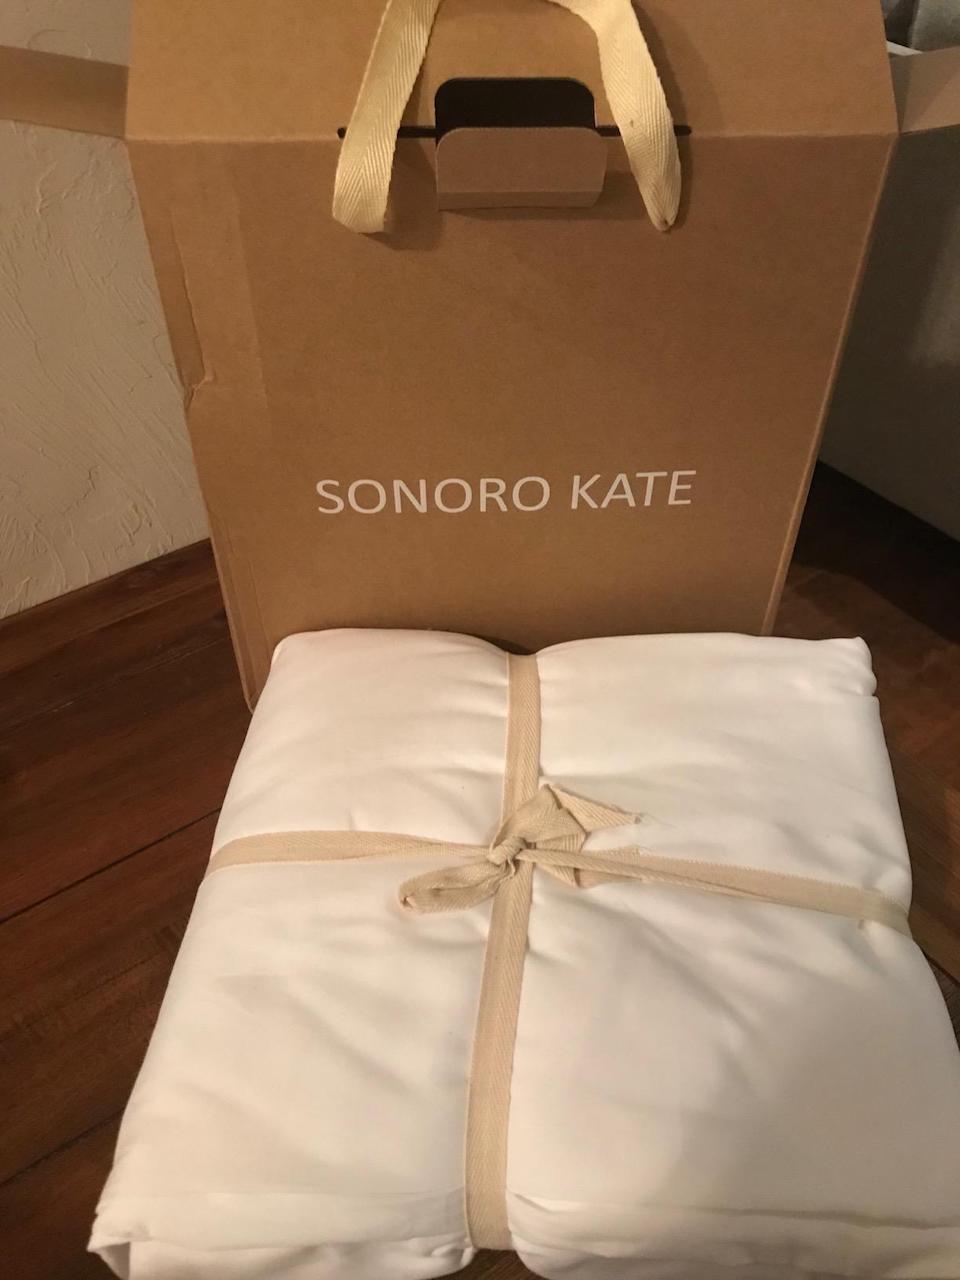 Sonoro Kate bed sheets 